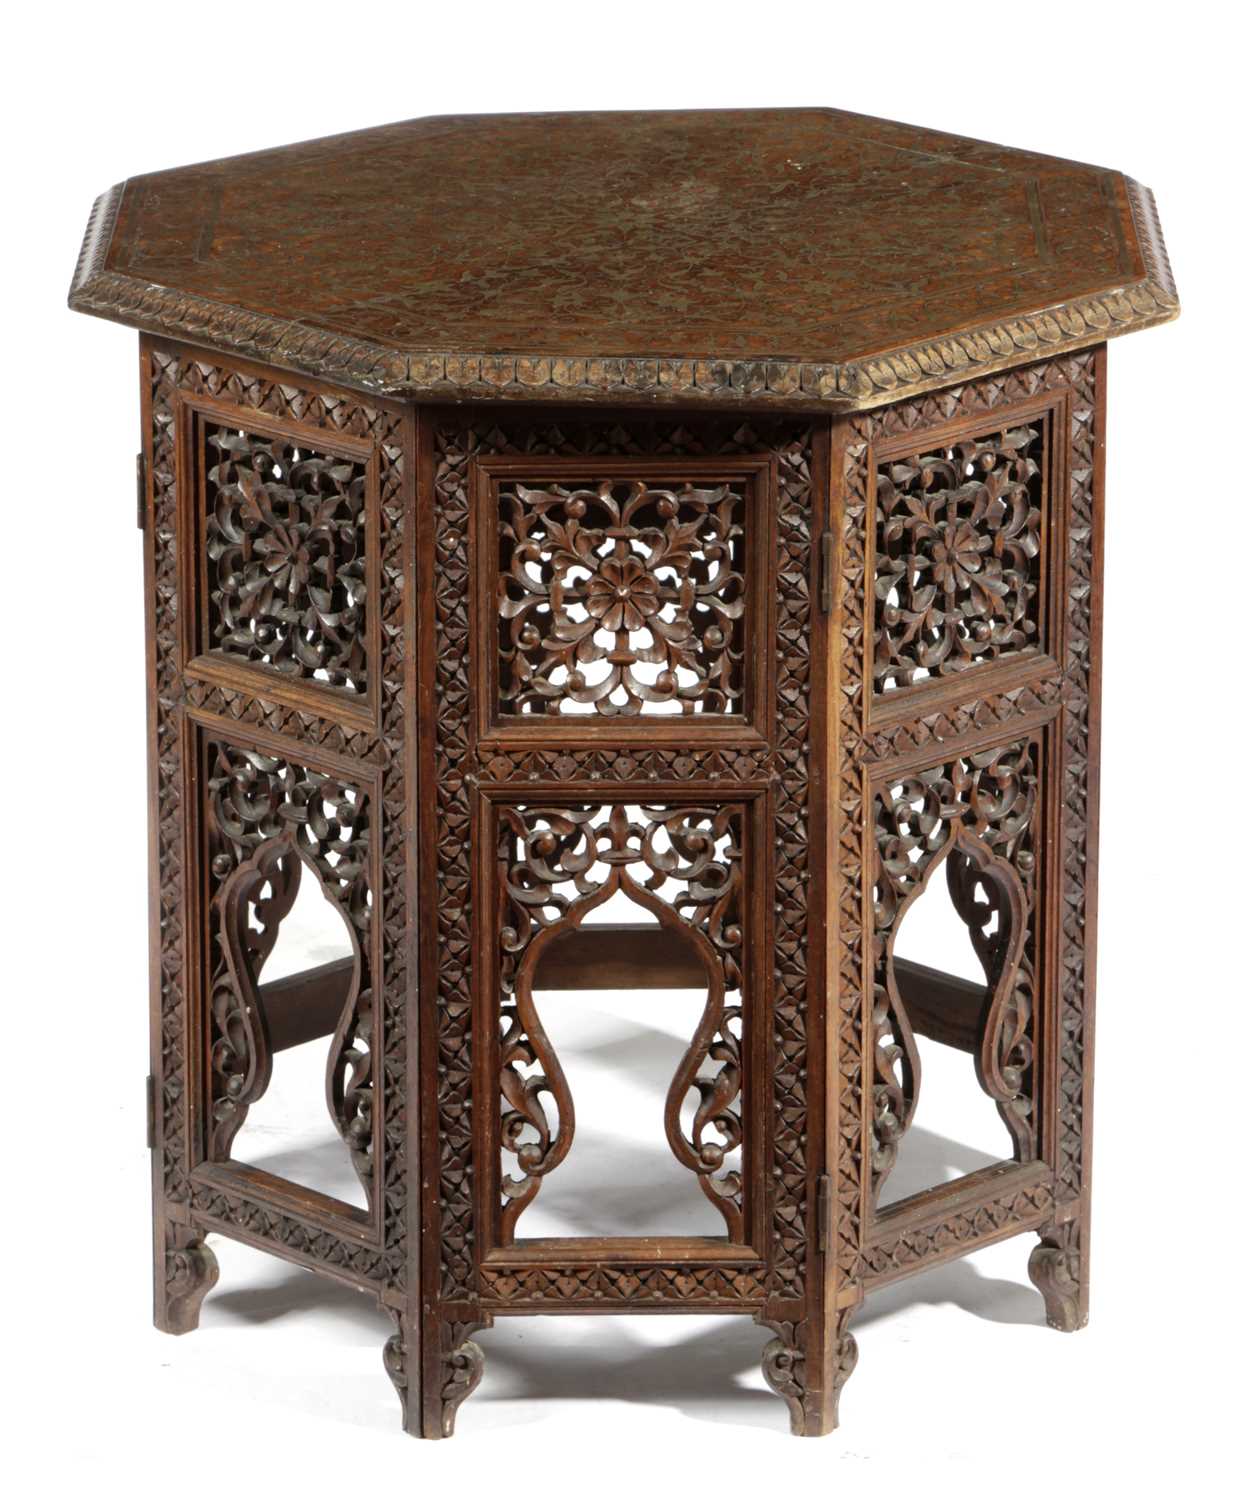 AN ANGLO-INDIAN HARDWOOD OCTAGONAL OCCASIONAL TABLE LATE 19TH / EARLY 20TH CENTURY the top brass